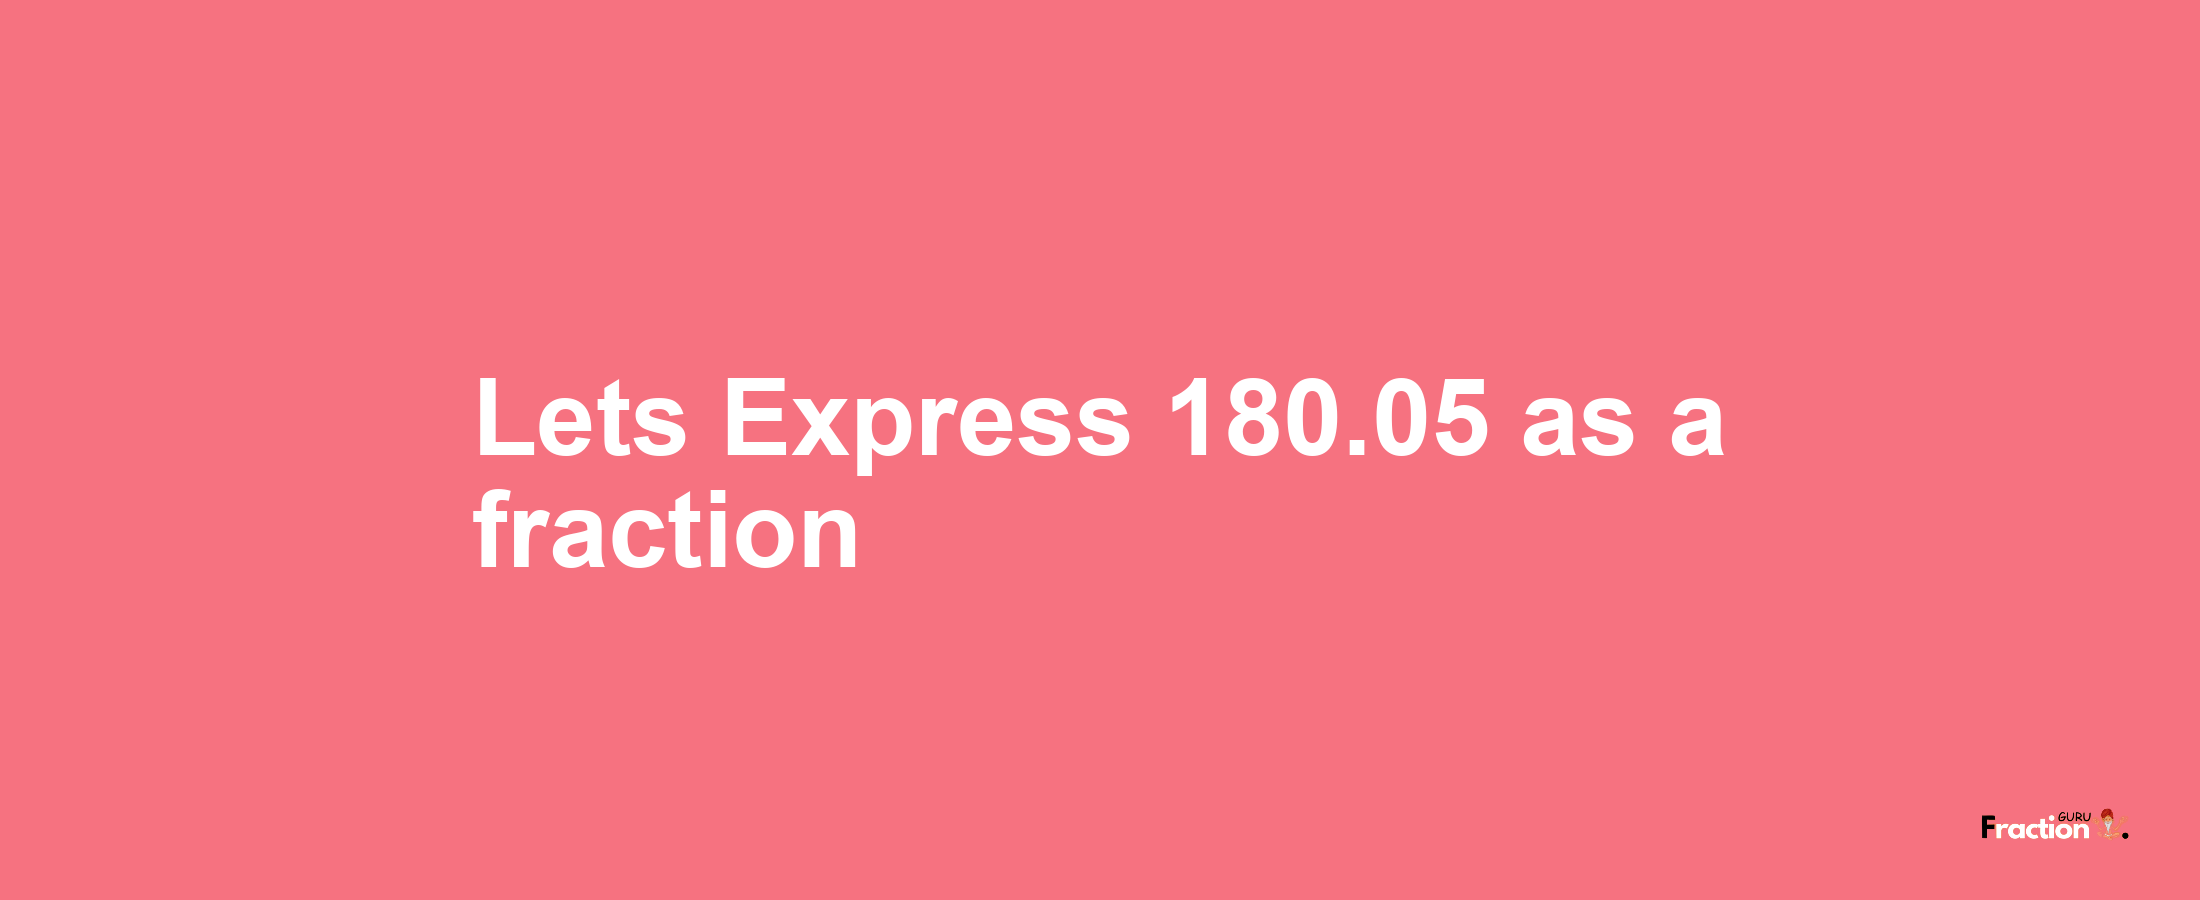 Lets Express 180.05 as afraction